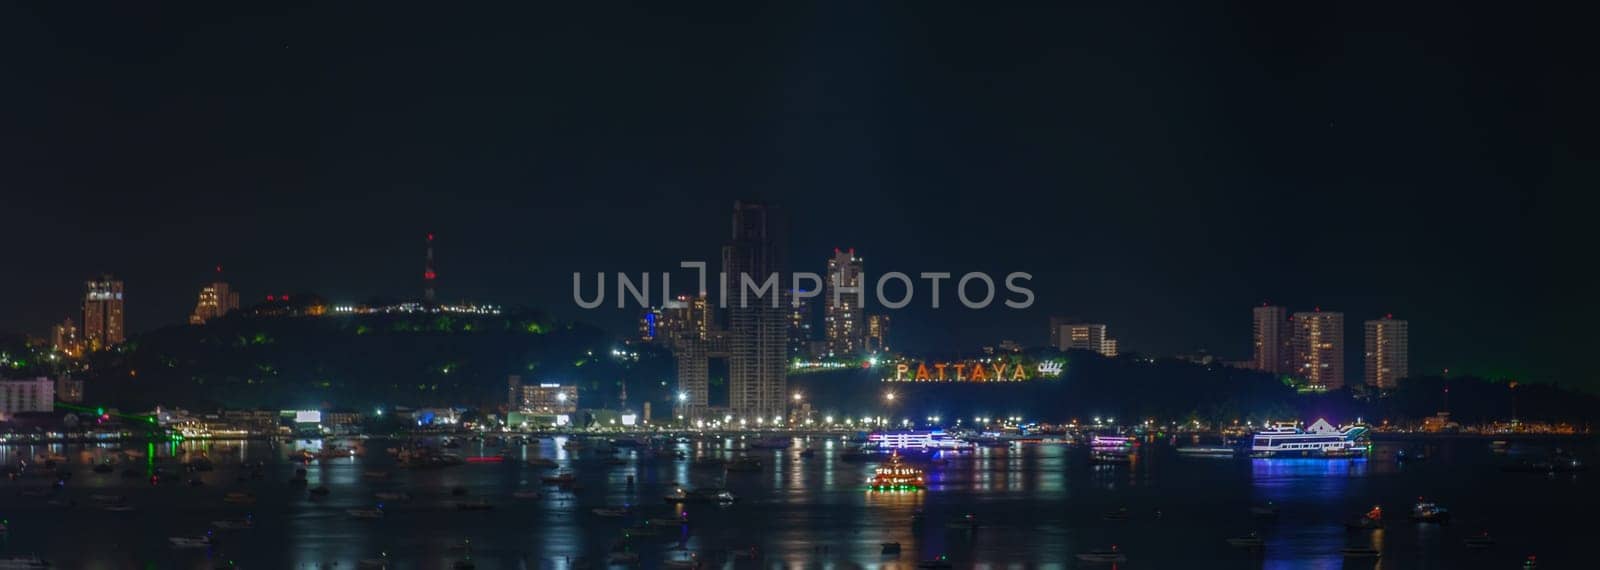 Pattaya Thailand, a view of the city skyline at night with hotels and skyscrapers buildings by fokkebok